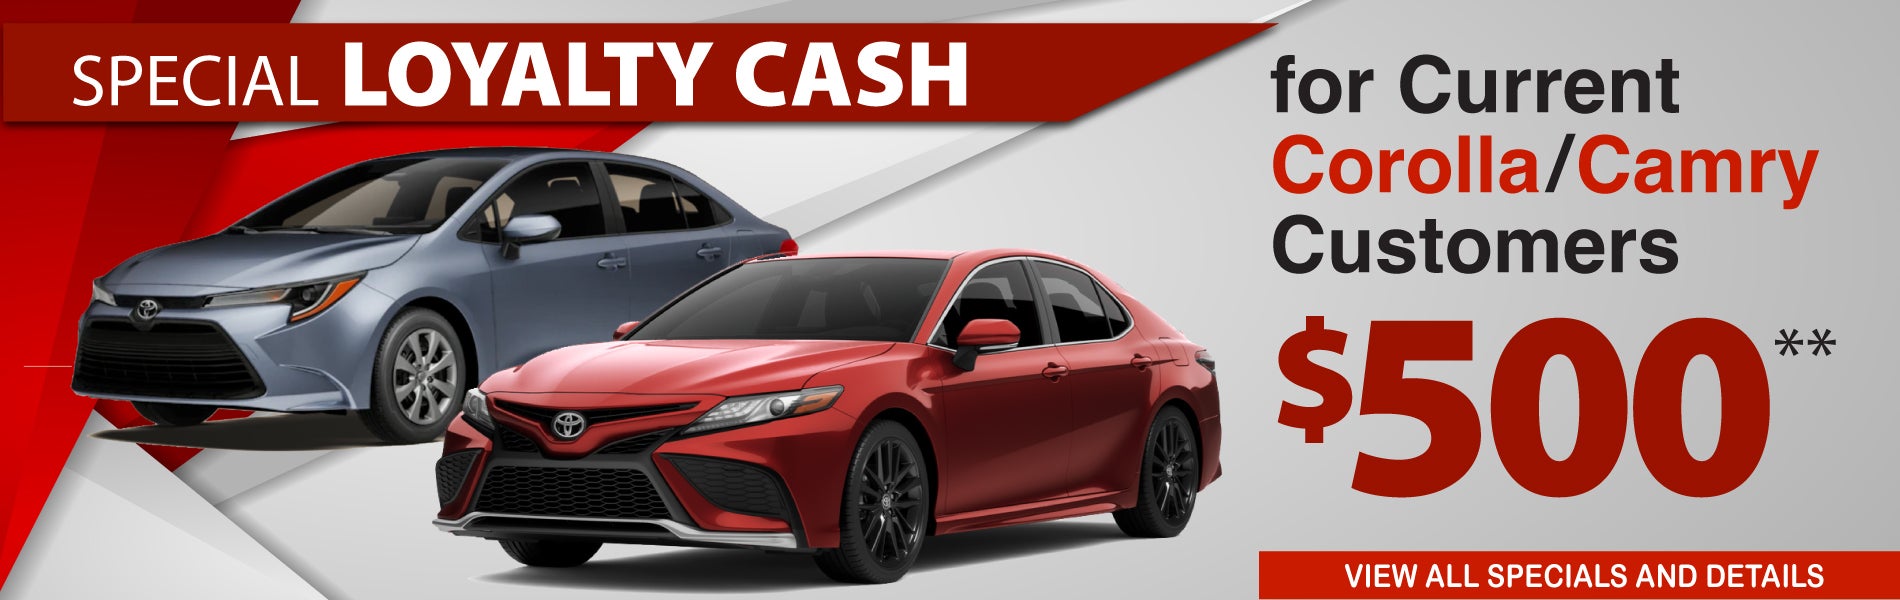 Special Camry Loyalty Cash of $500 